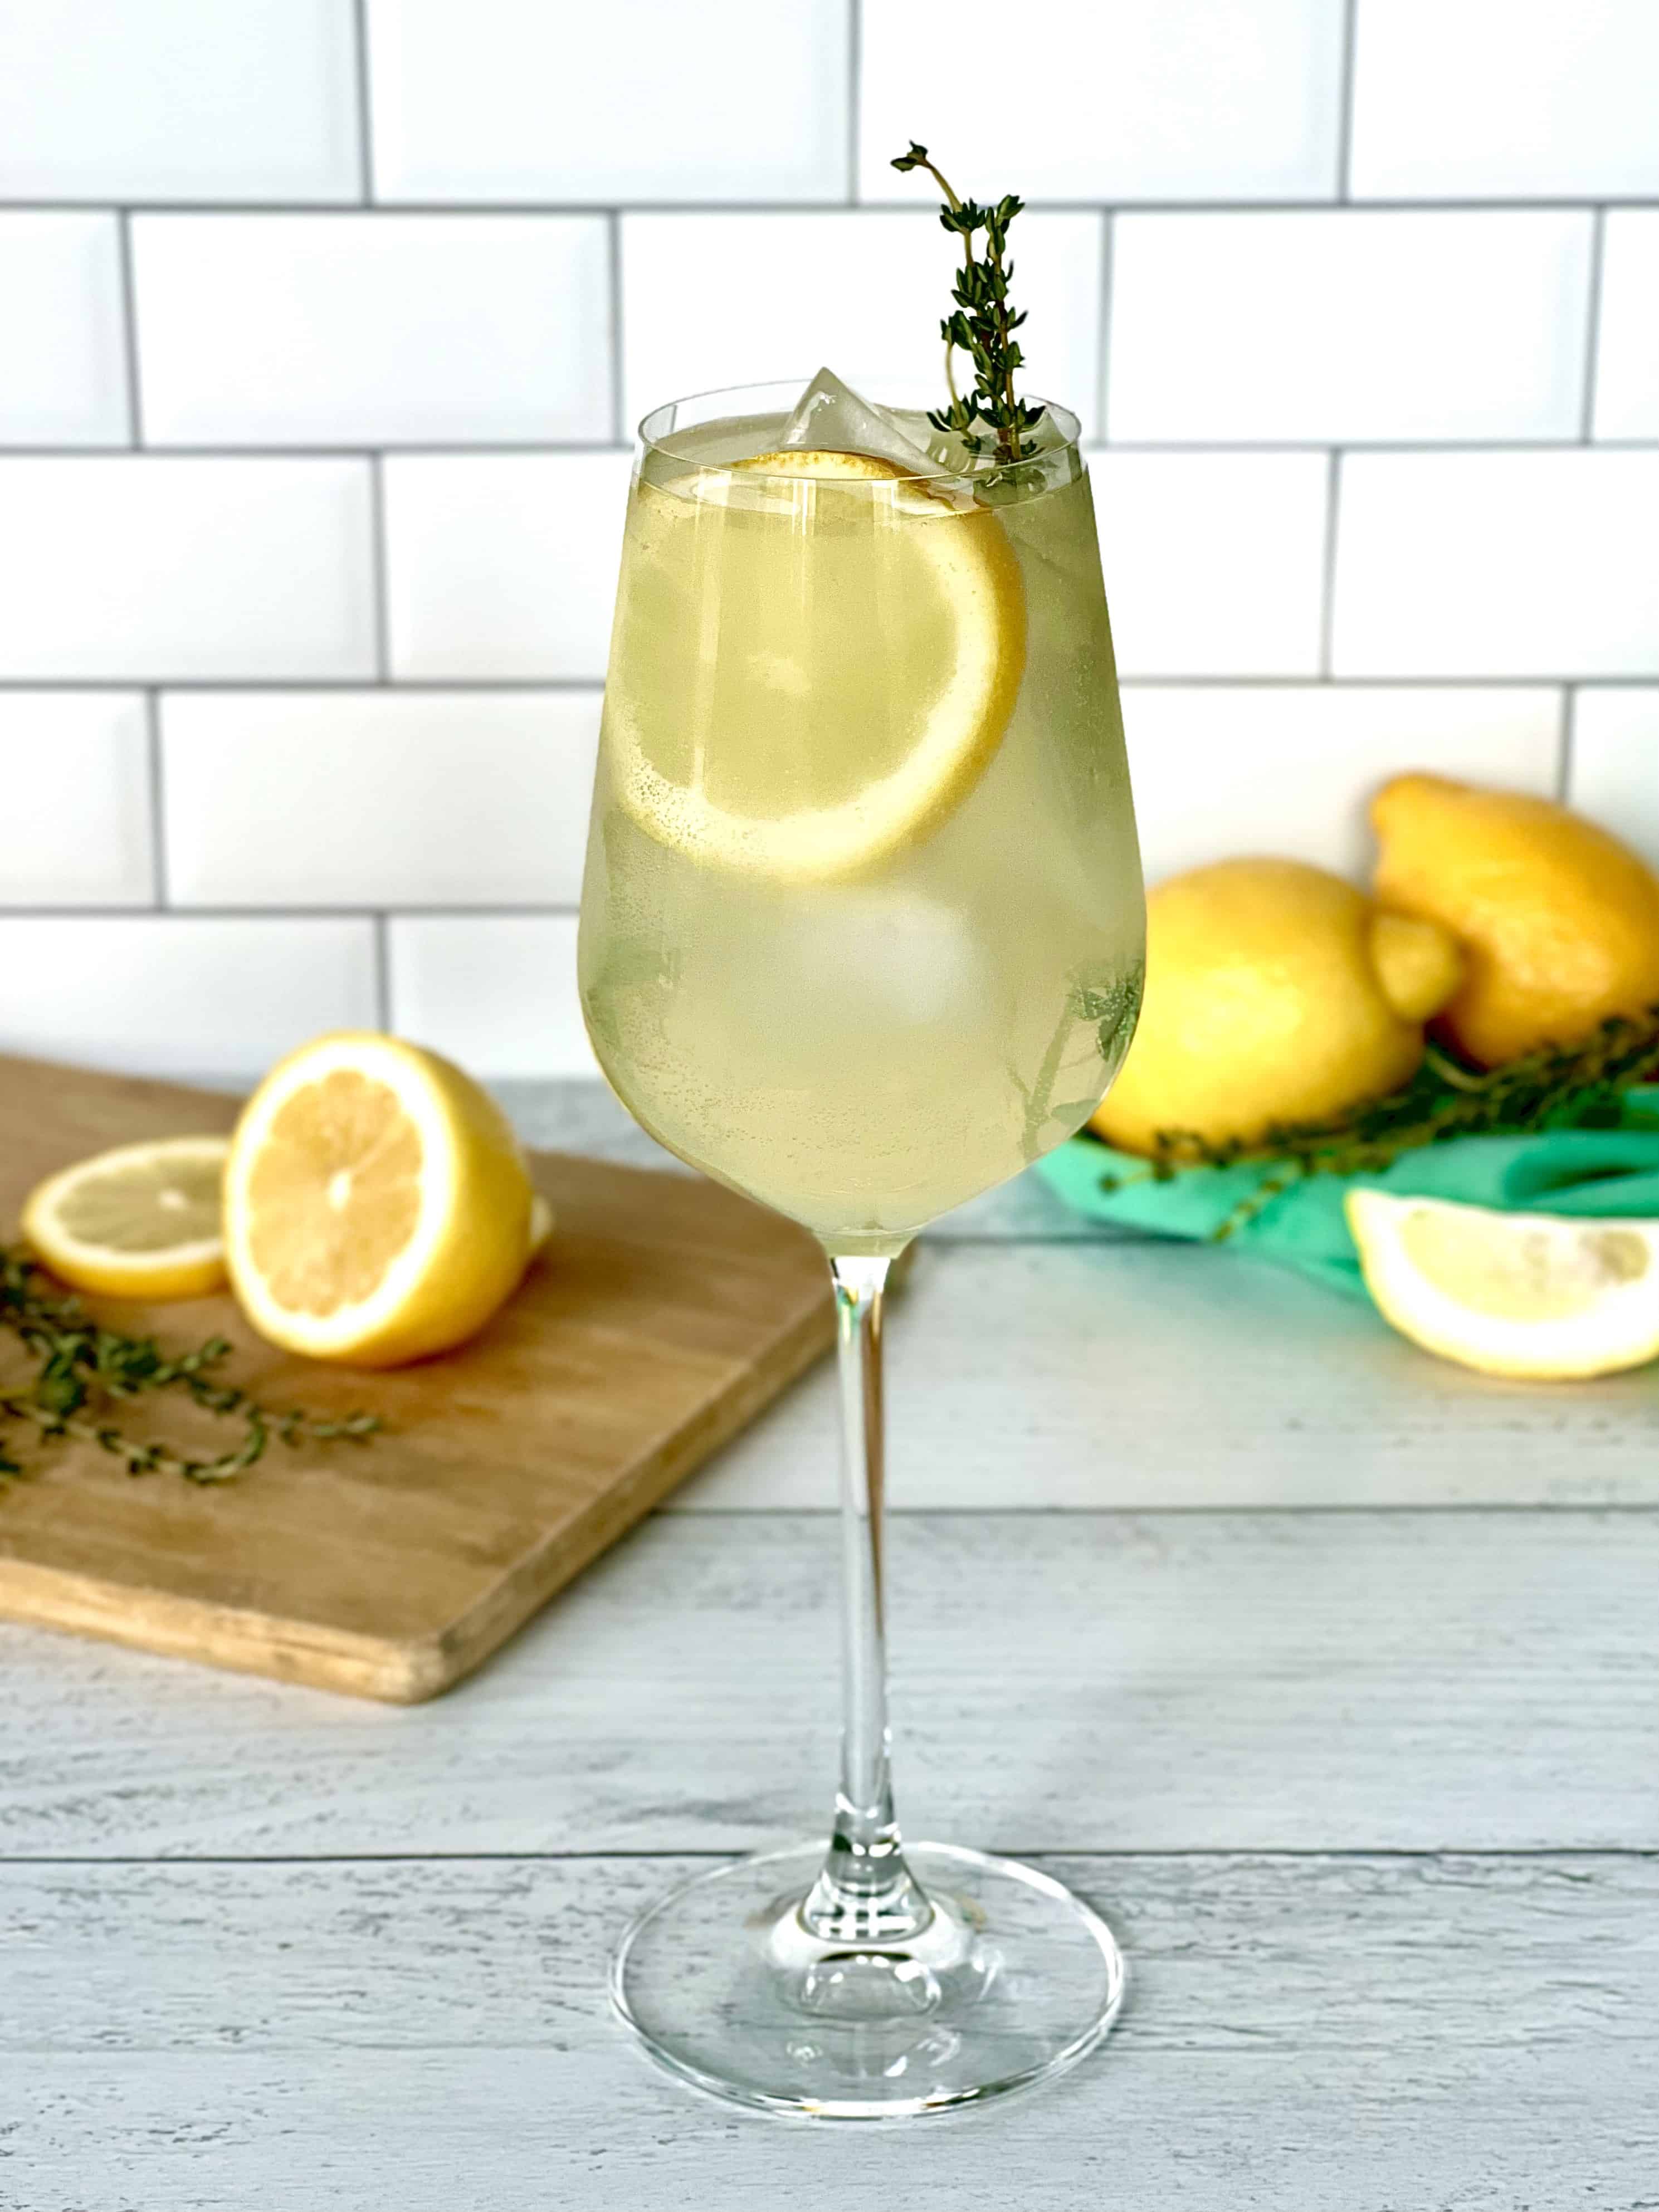 Limoncello spritzer with prosecco in a wine glass with ice, a lemon slice and sprig of thyme.